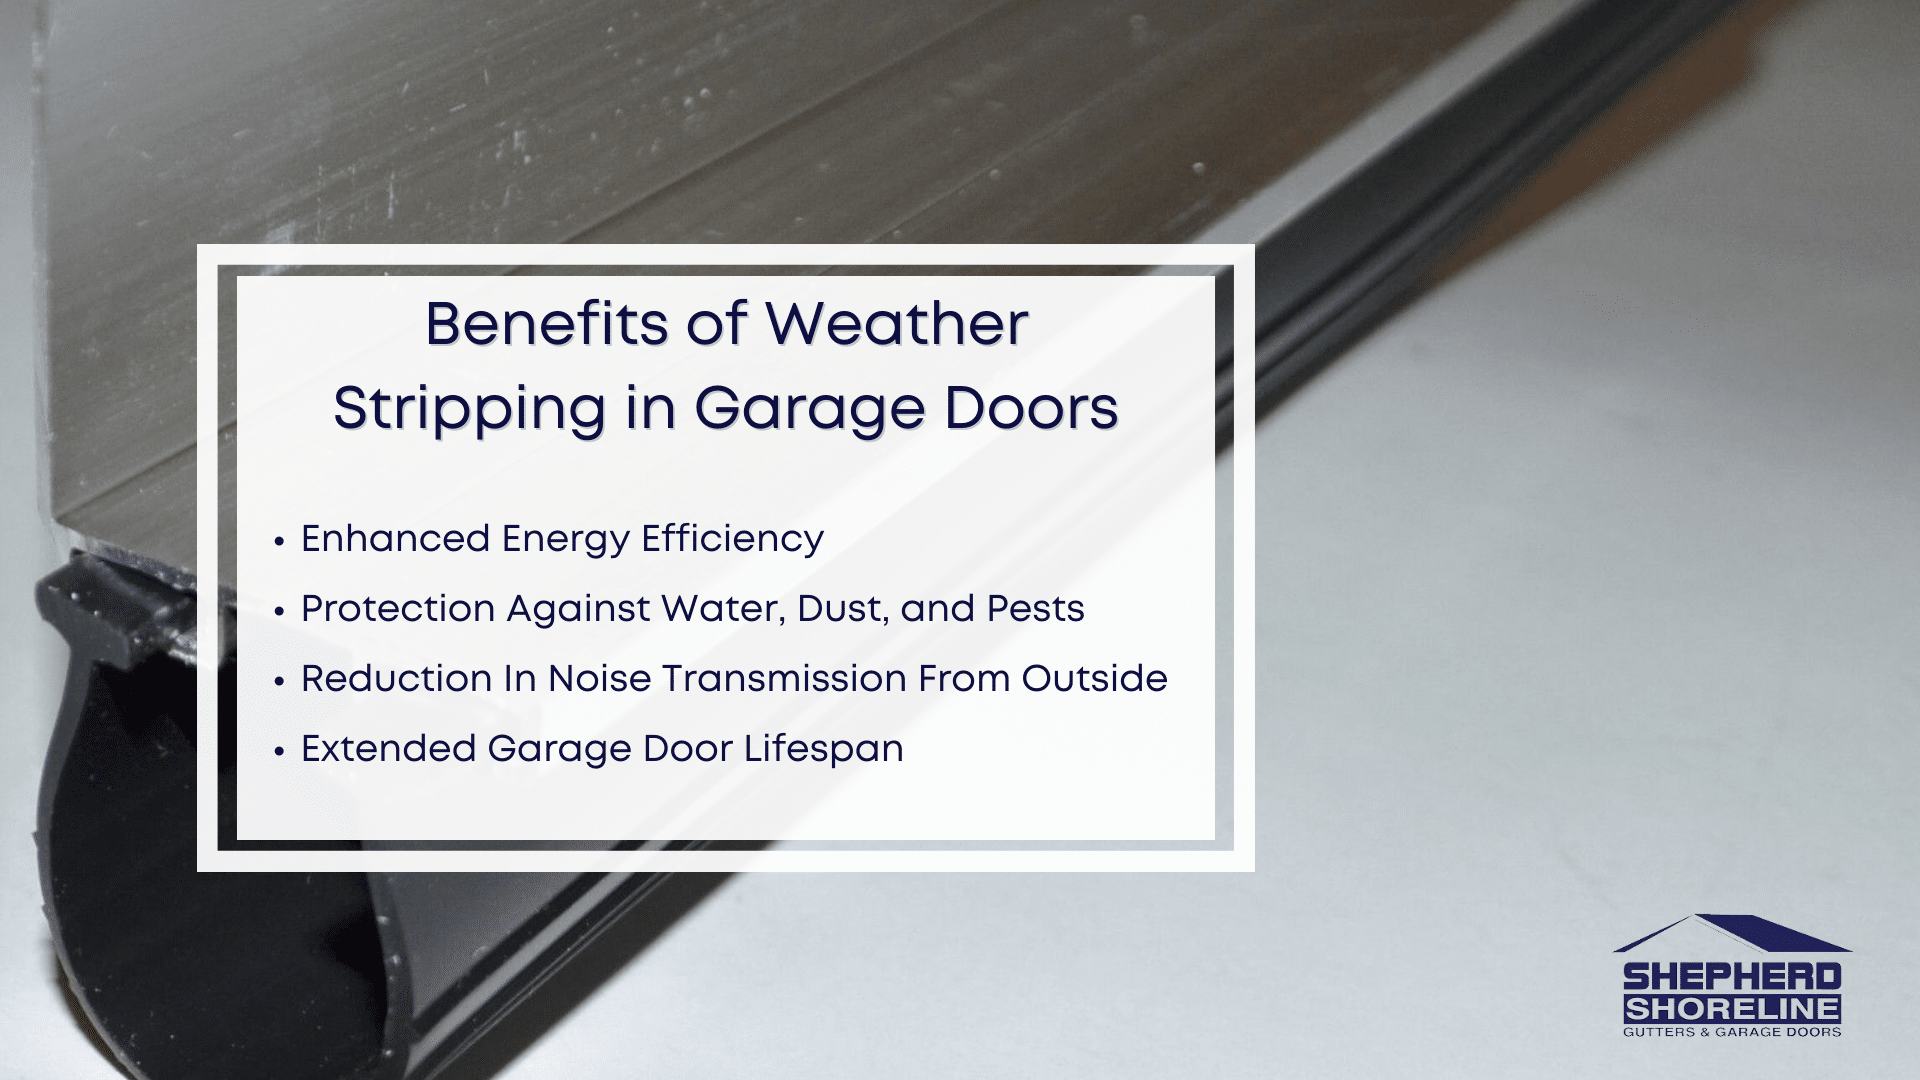 Infographic image of benefits of weather stripping in garage doors